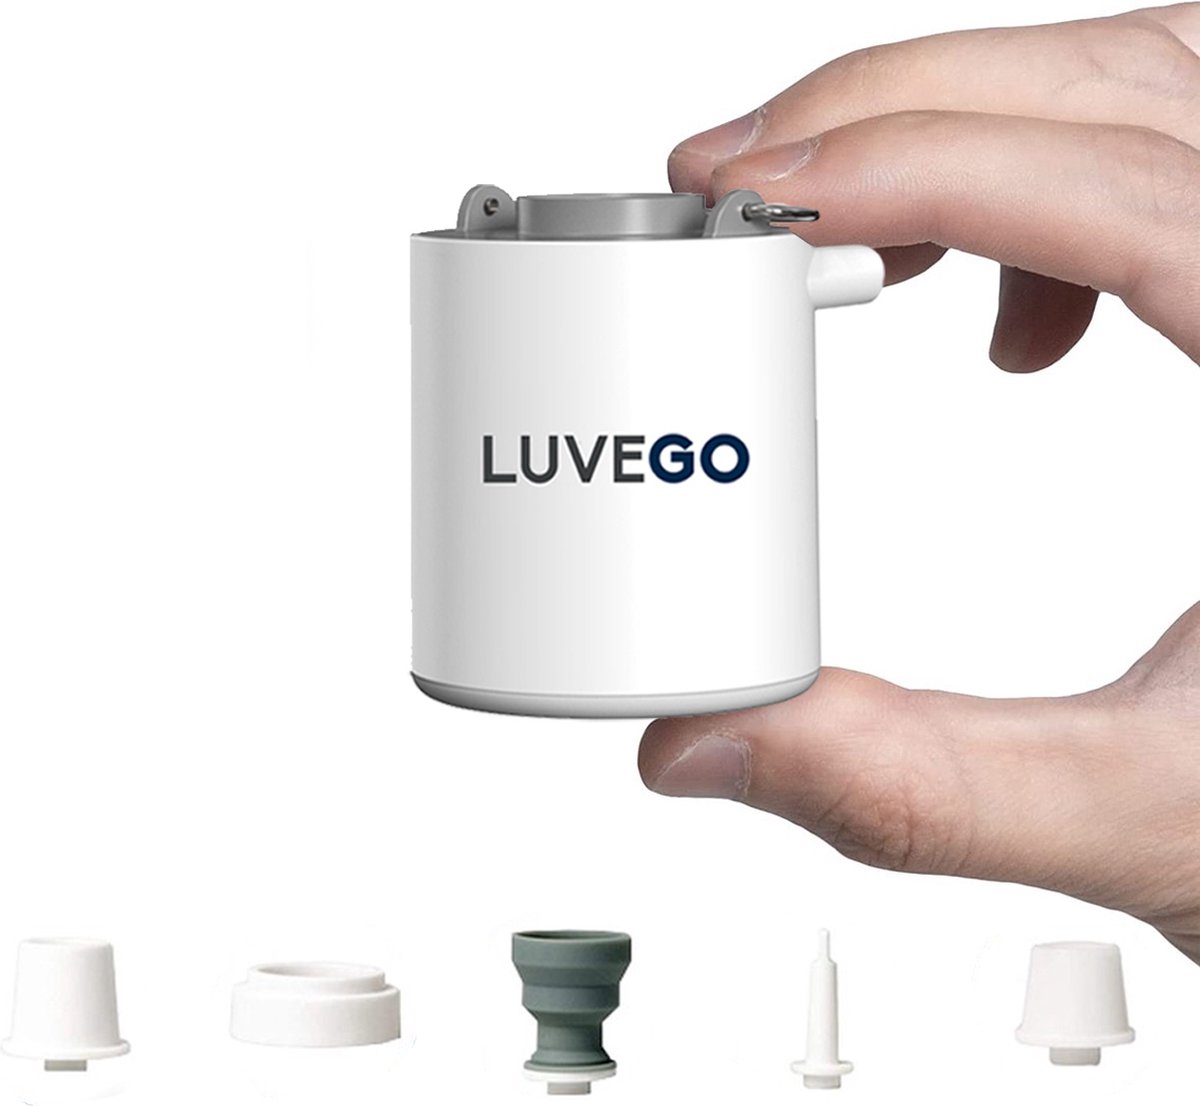 Luvego luchtbed pomp MINI PUMP - Oplaadbare luchtbedpomp - 400LM lantaarn - 3-in-1 - LUVEGO